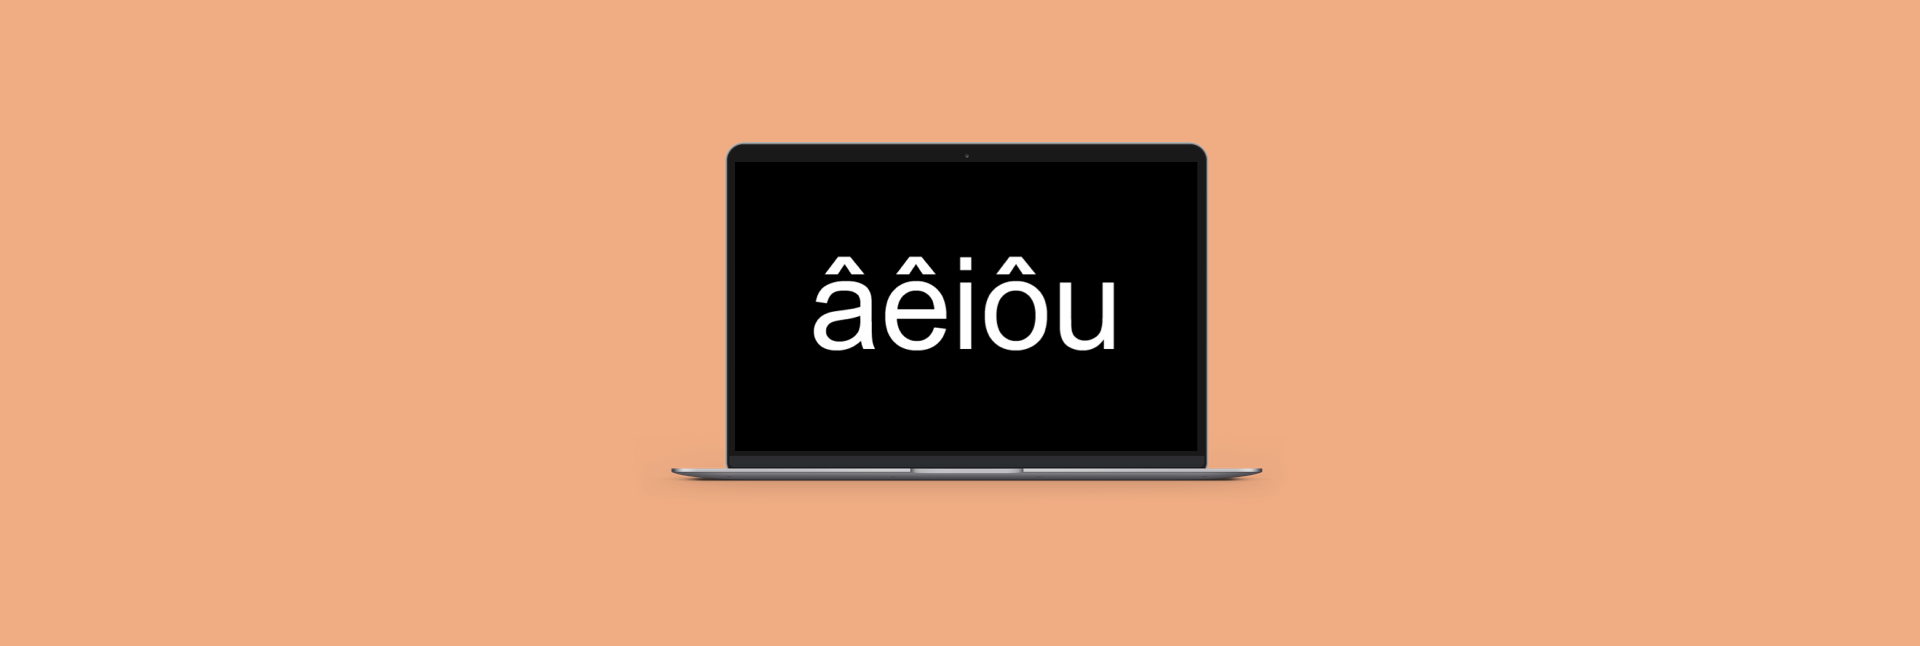 How to Type Letters with Accents on Mac